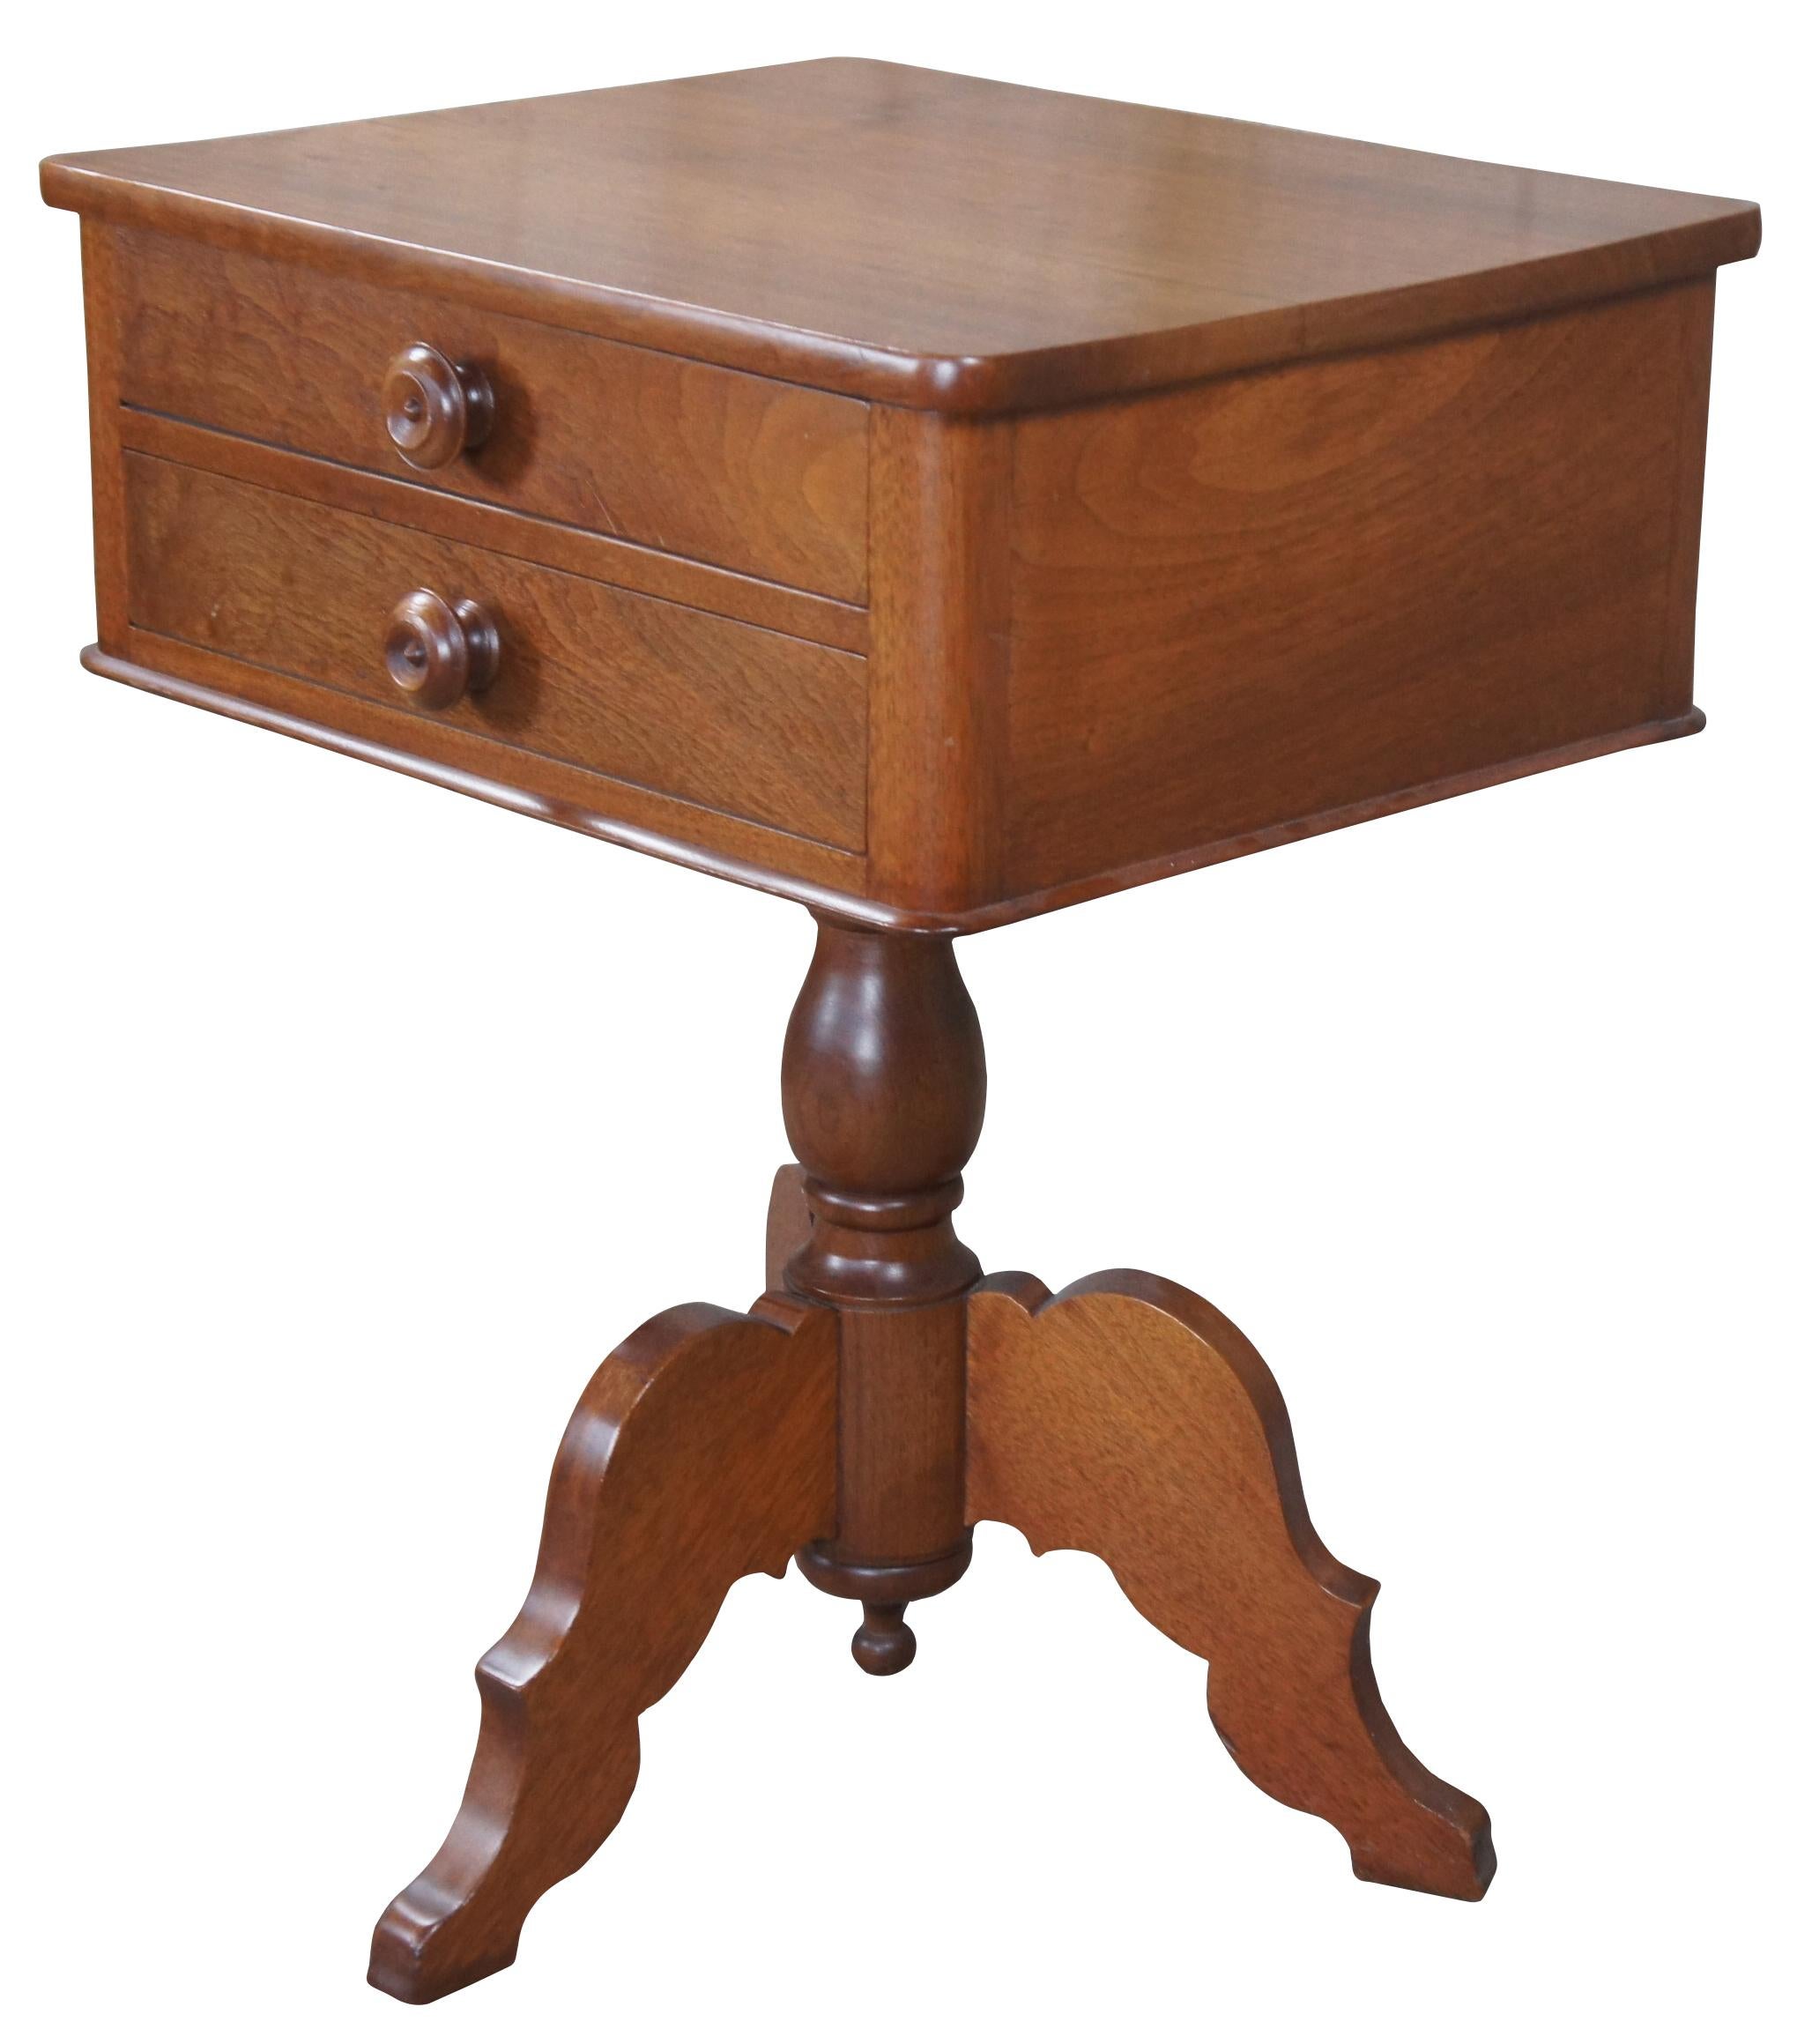 Antique American Empire parlor sewing table. Made of walnut featuring rectangular form with two hand dovetailed drawers over a turned pedestal tripod base.
Measures: 29